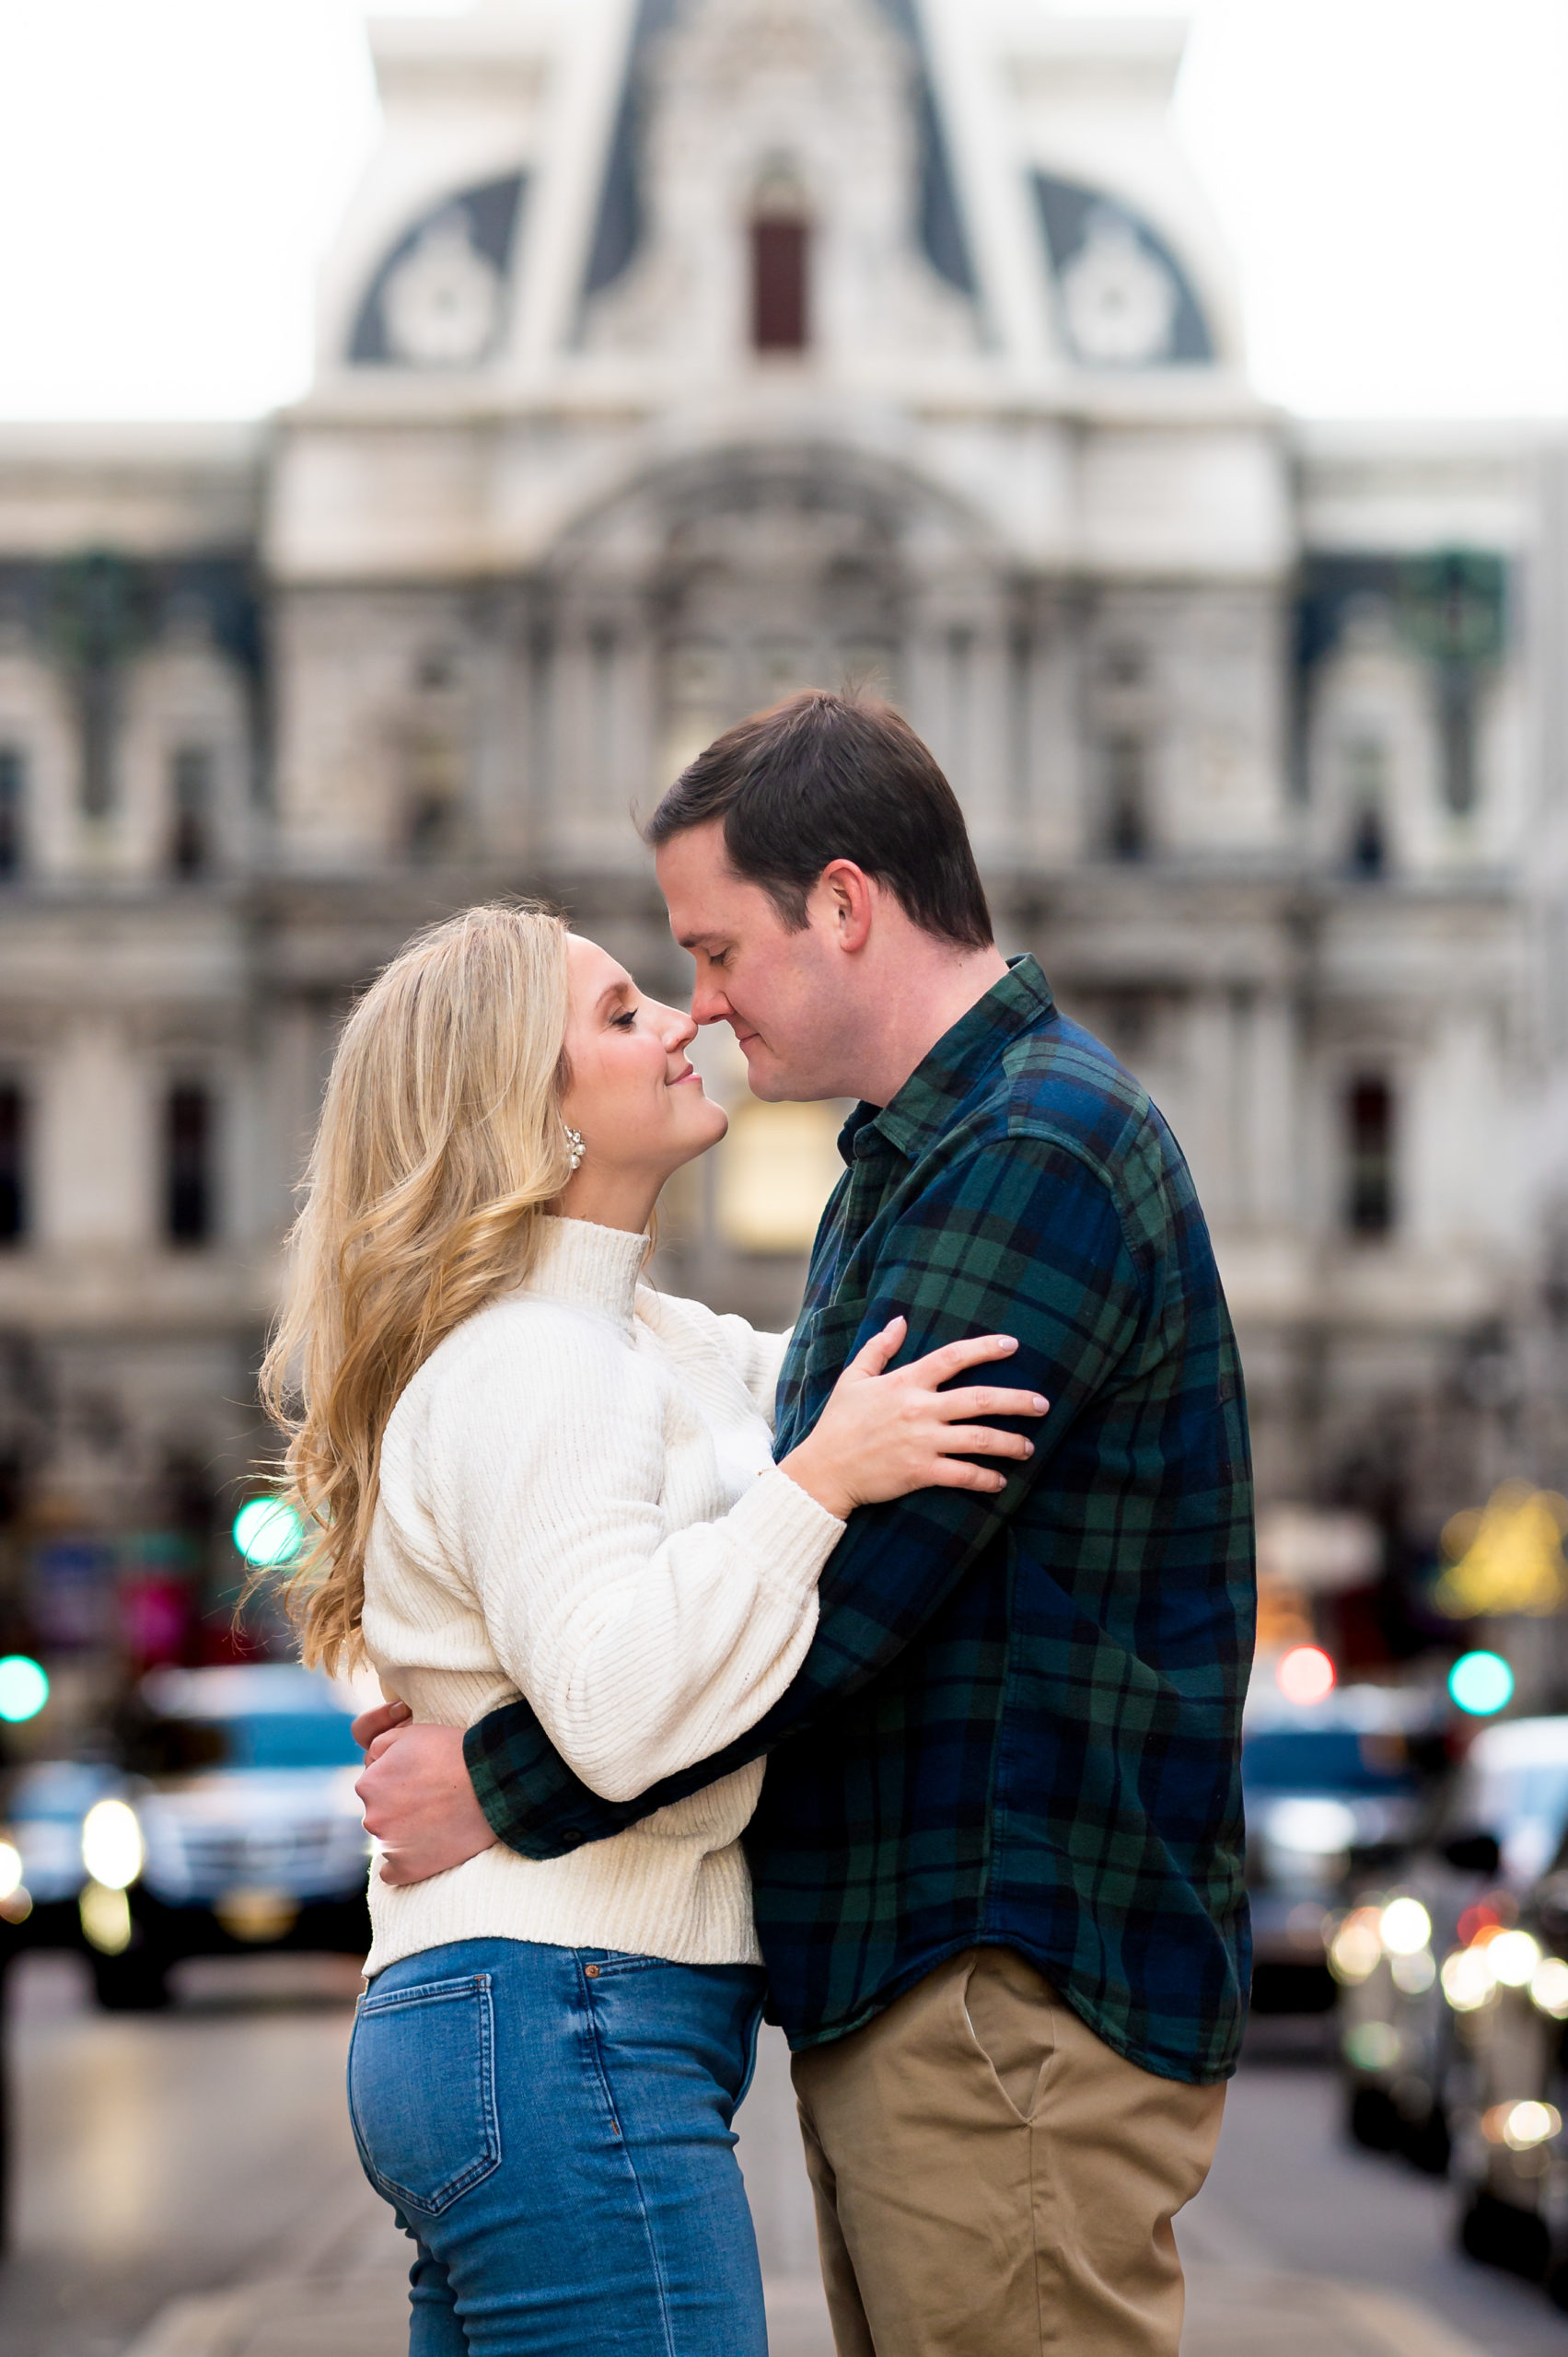 Engagement photo of a couple standing in front of City Hall on Broad Street in Philadelphia PA